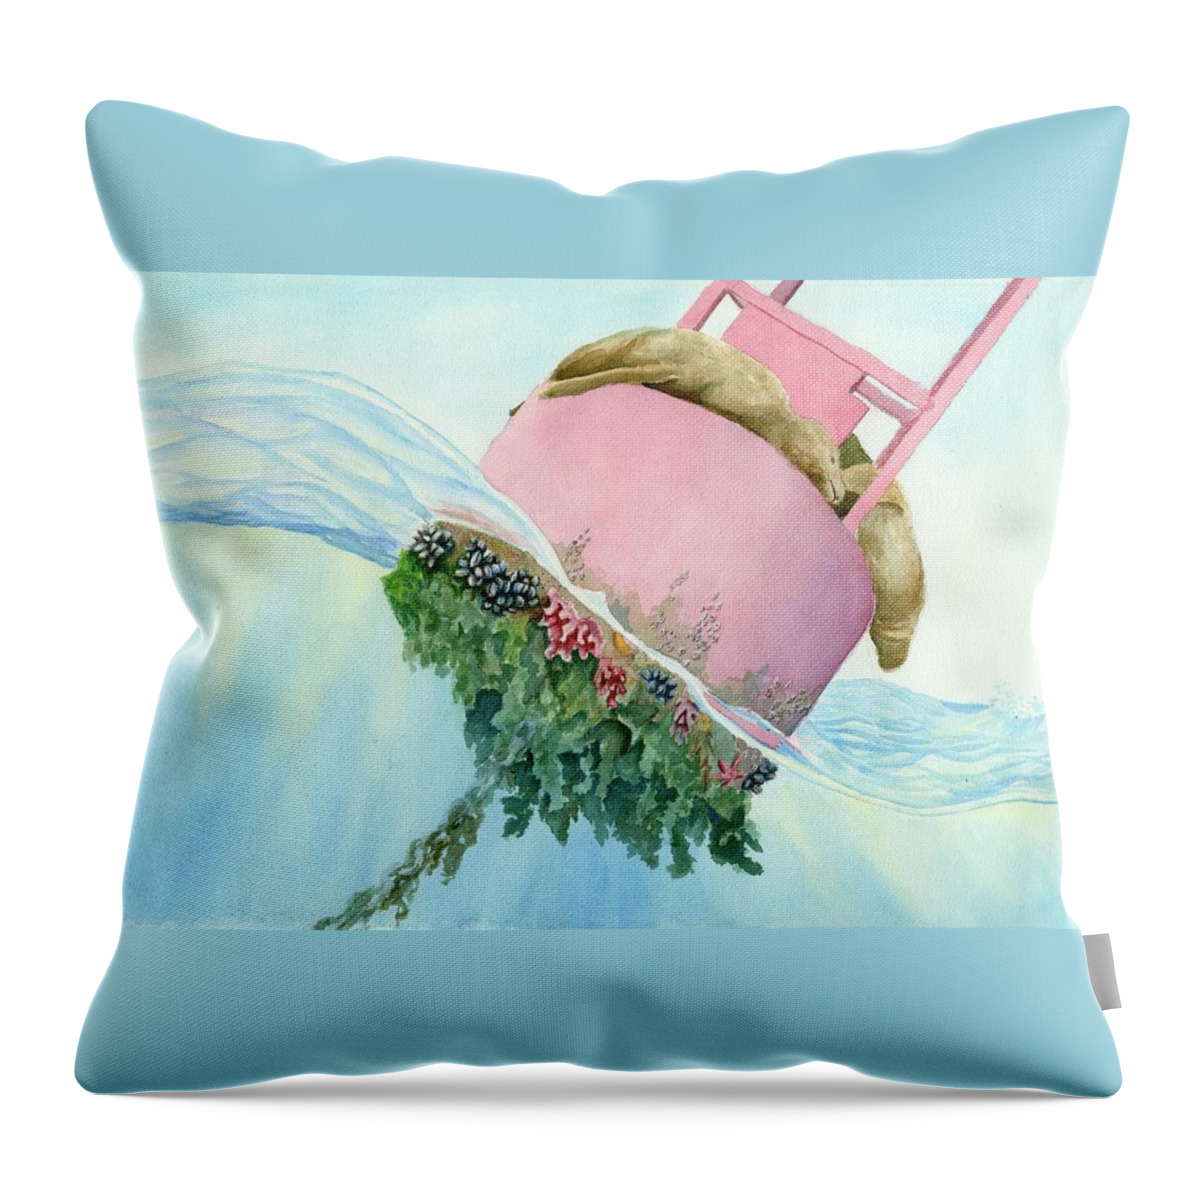 California Throw Pillow featuring the painting Safe Haven by Marina Zellers grade 12 by California Coastal Commission